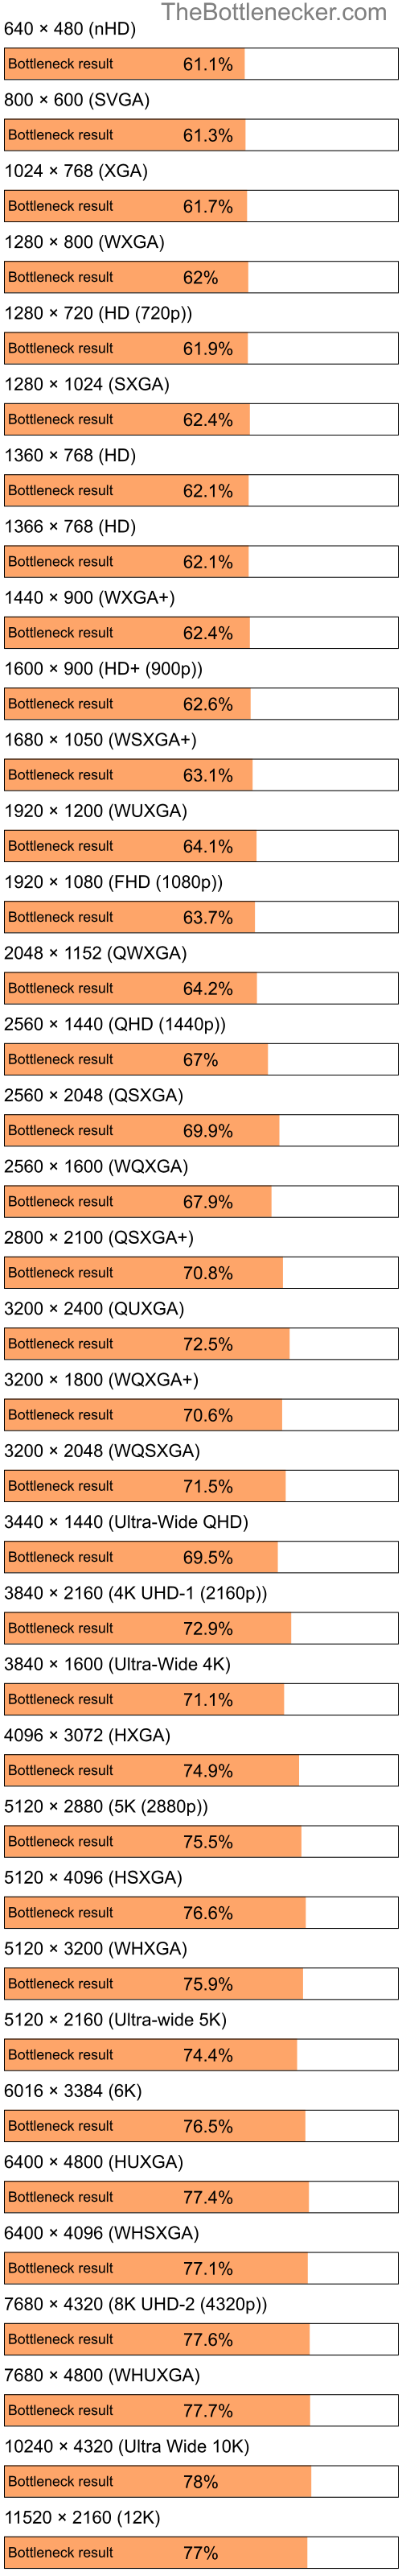 Bottleneck results by resolution for Intel Pentium 4 and AMD Mobility Radeon HD 3430 in General Tasks